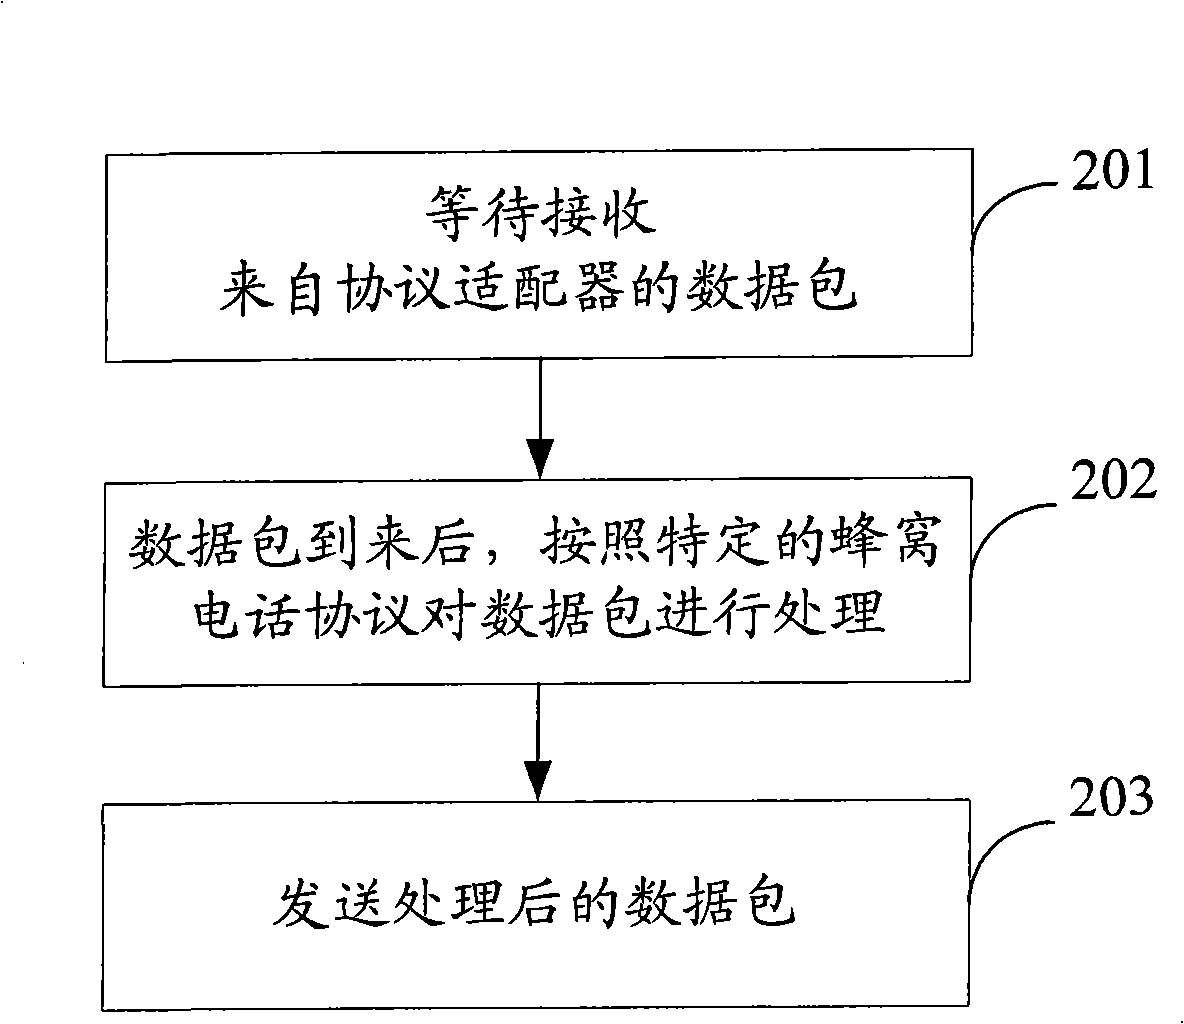 Expandable base station system and implementing method thereof